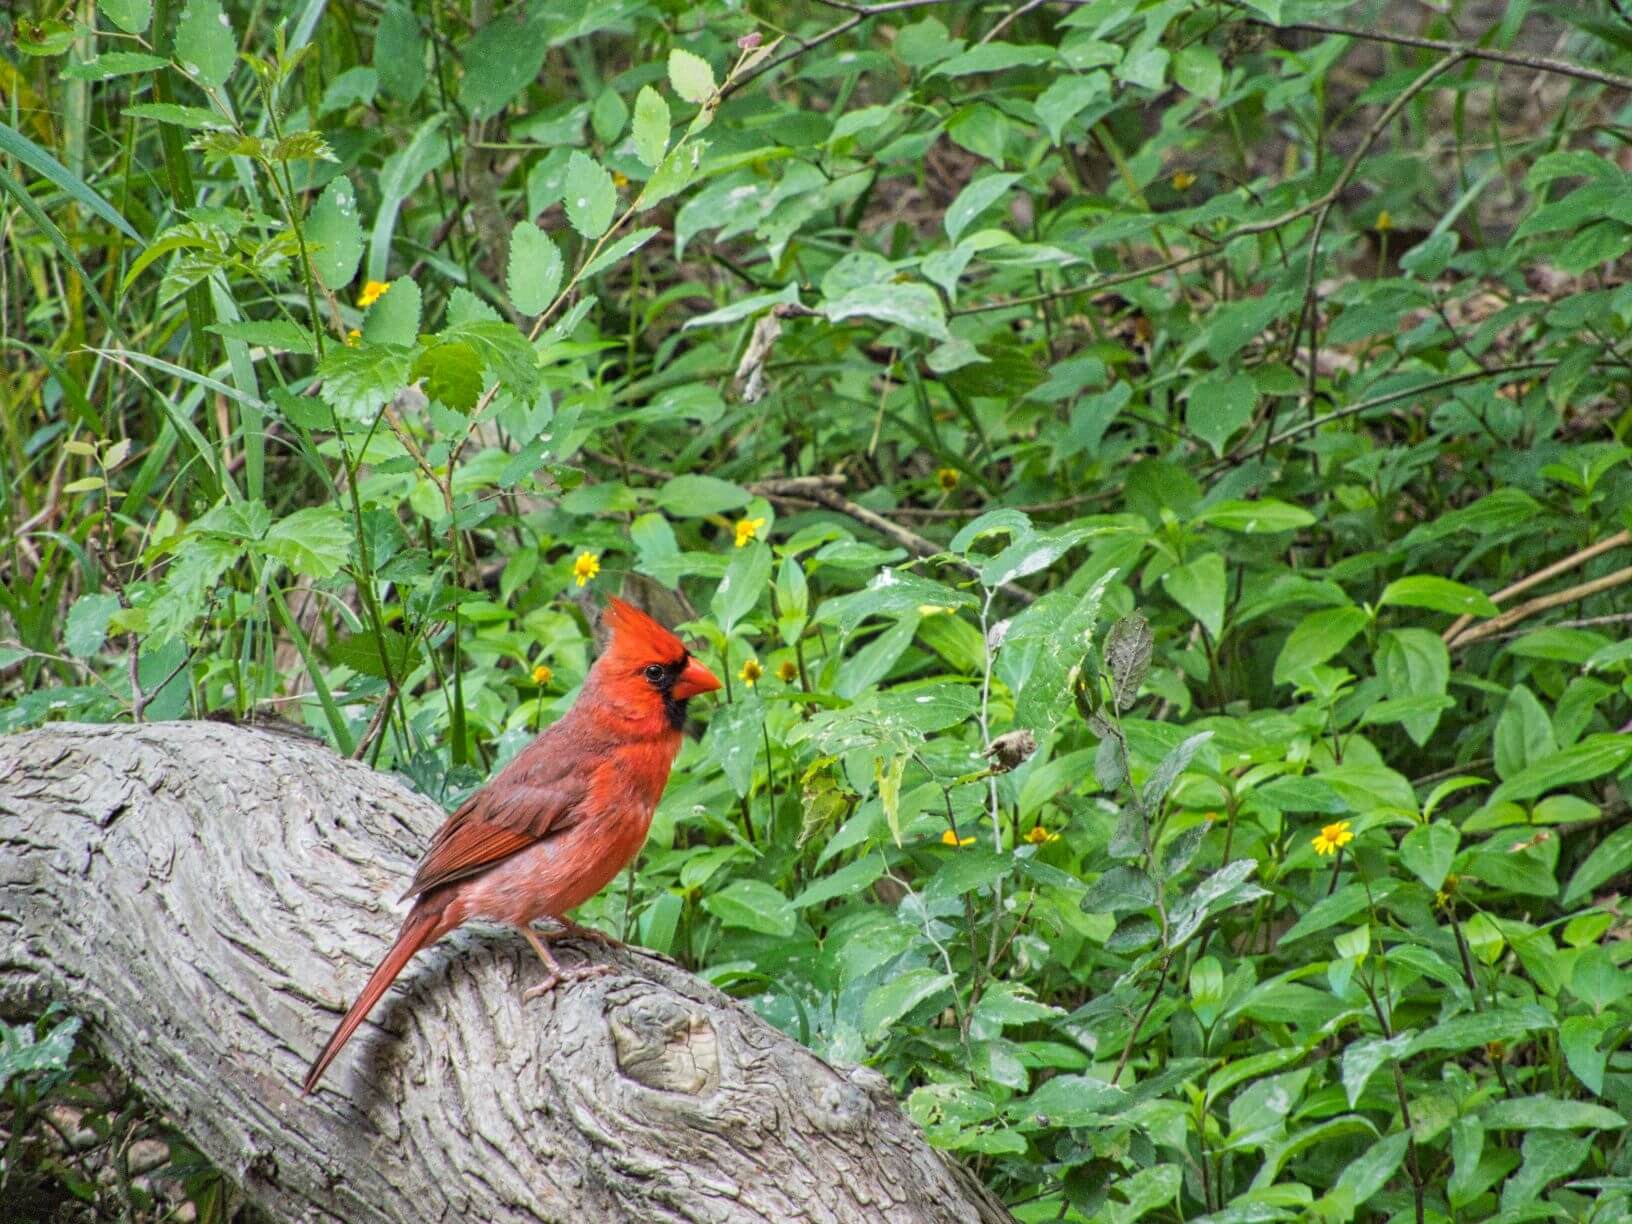 a red cardinal bird sits on a log with greenery in the background